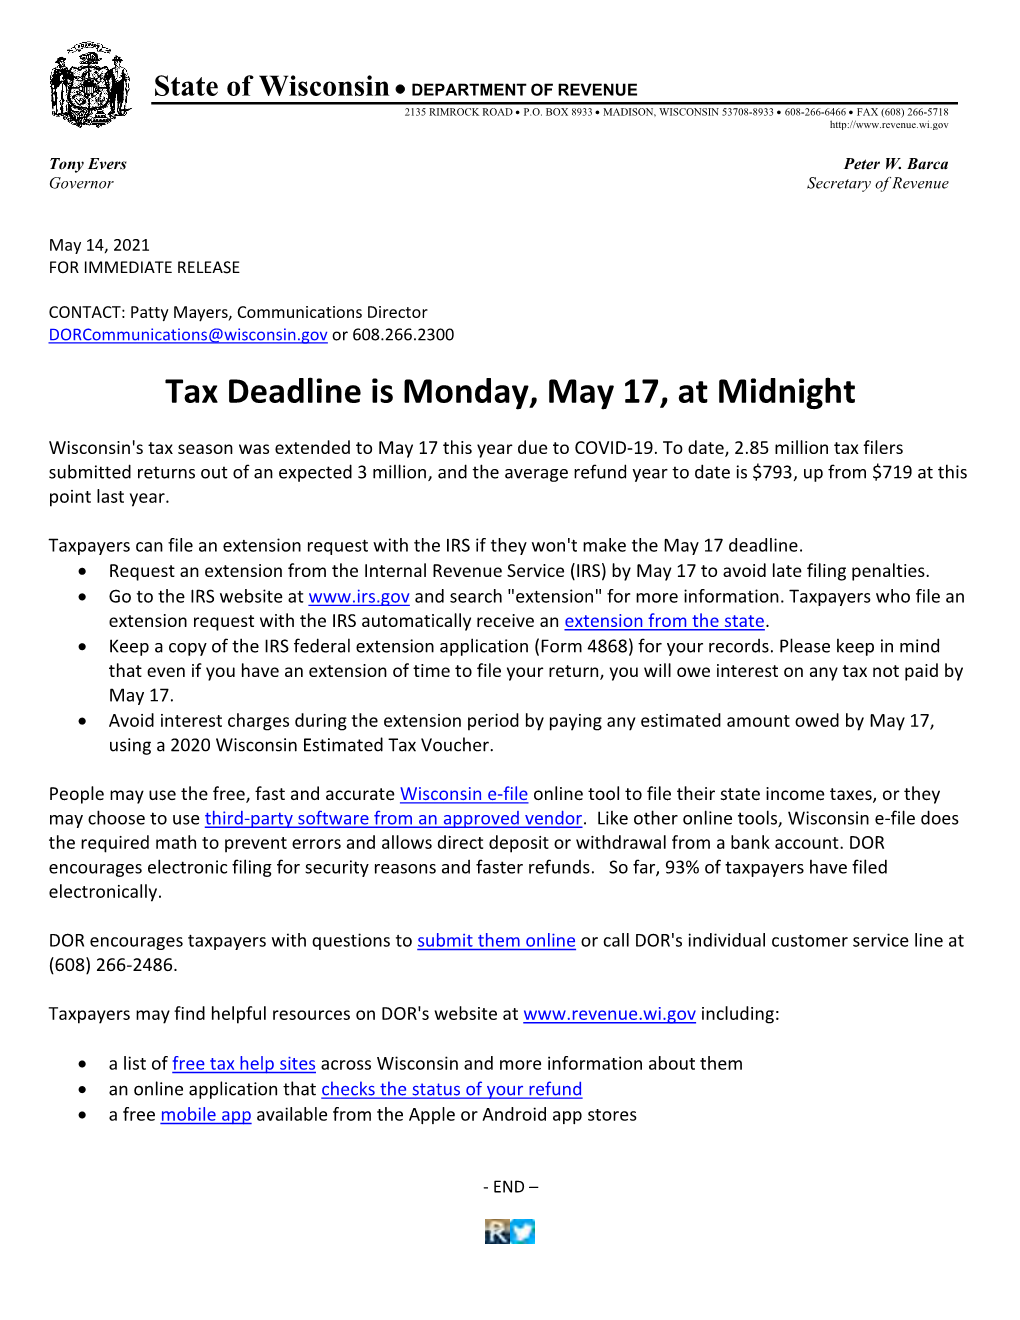 Three-Days-Remain-To-File-Taxes